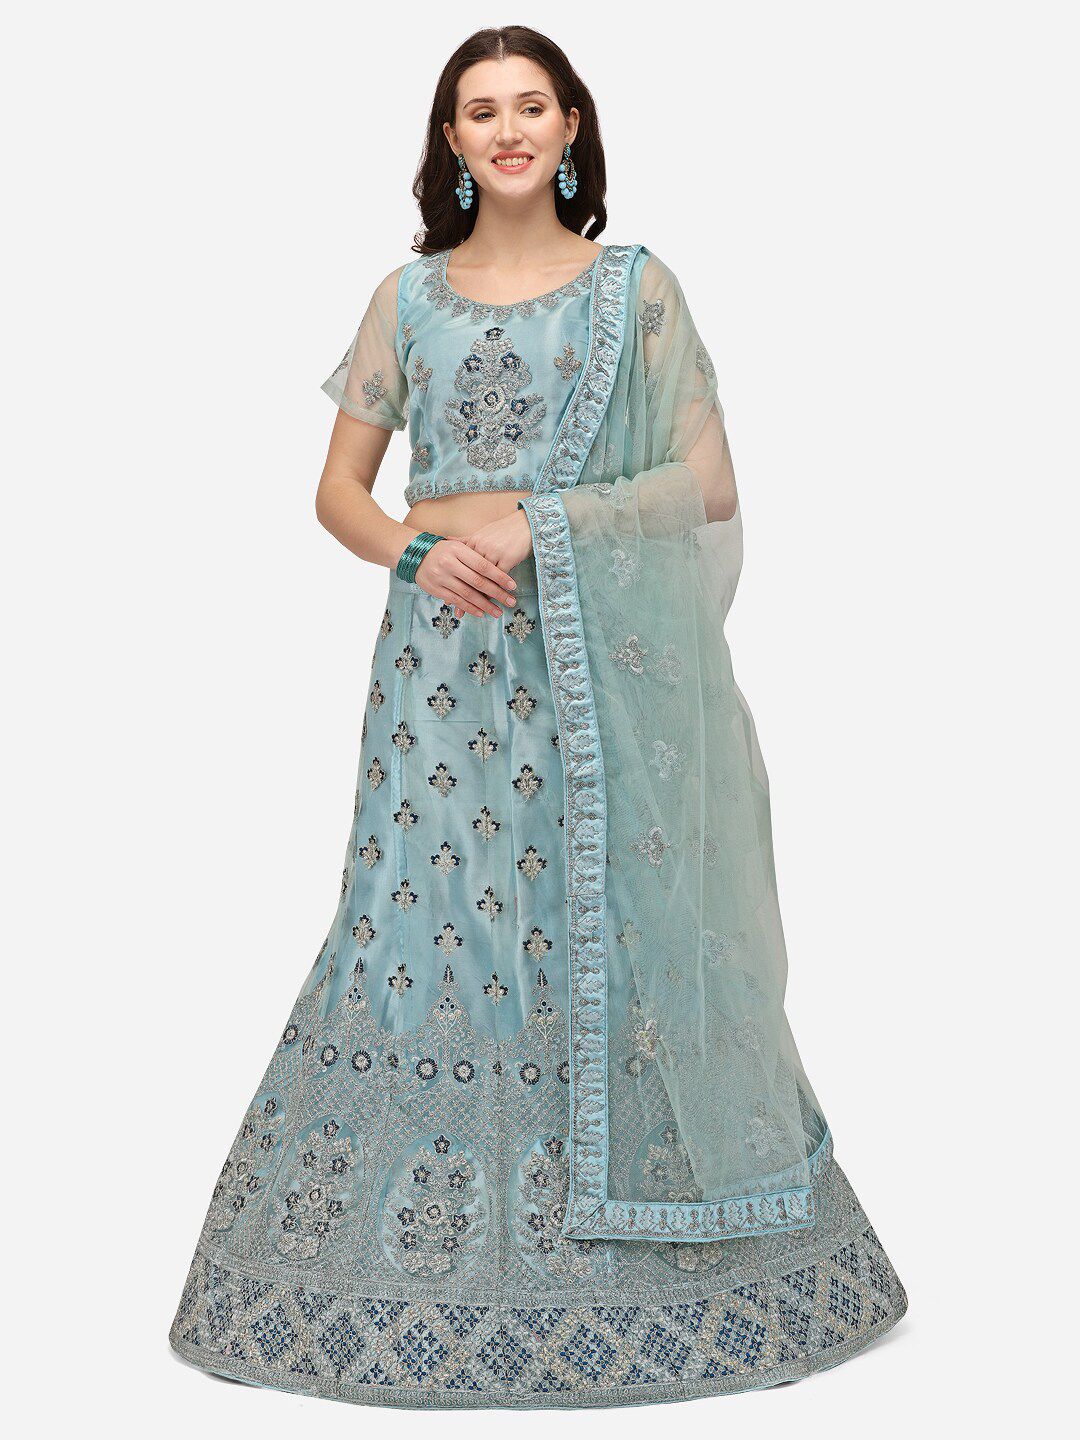 VRSALES Turquoise Blue & Silver-Toned Embroidered Semi-Stitched Lehenga & Unstitched Blouse With Dupatta Price in India